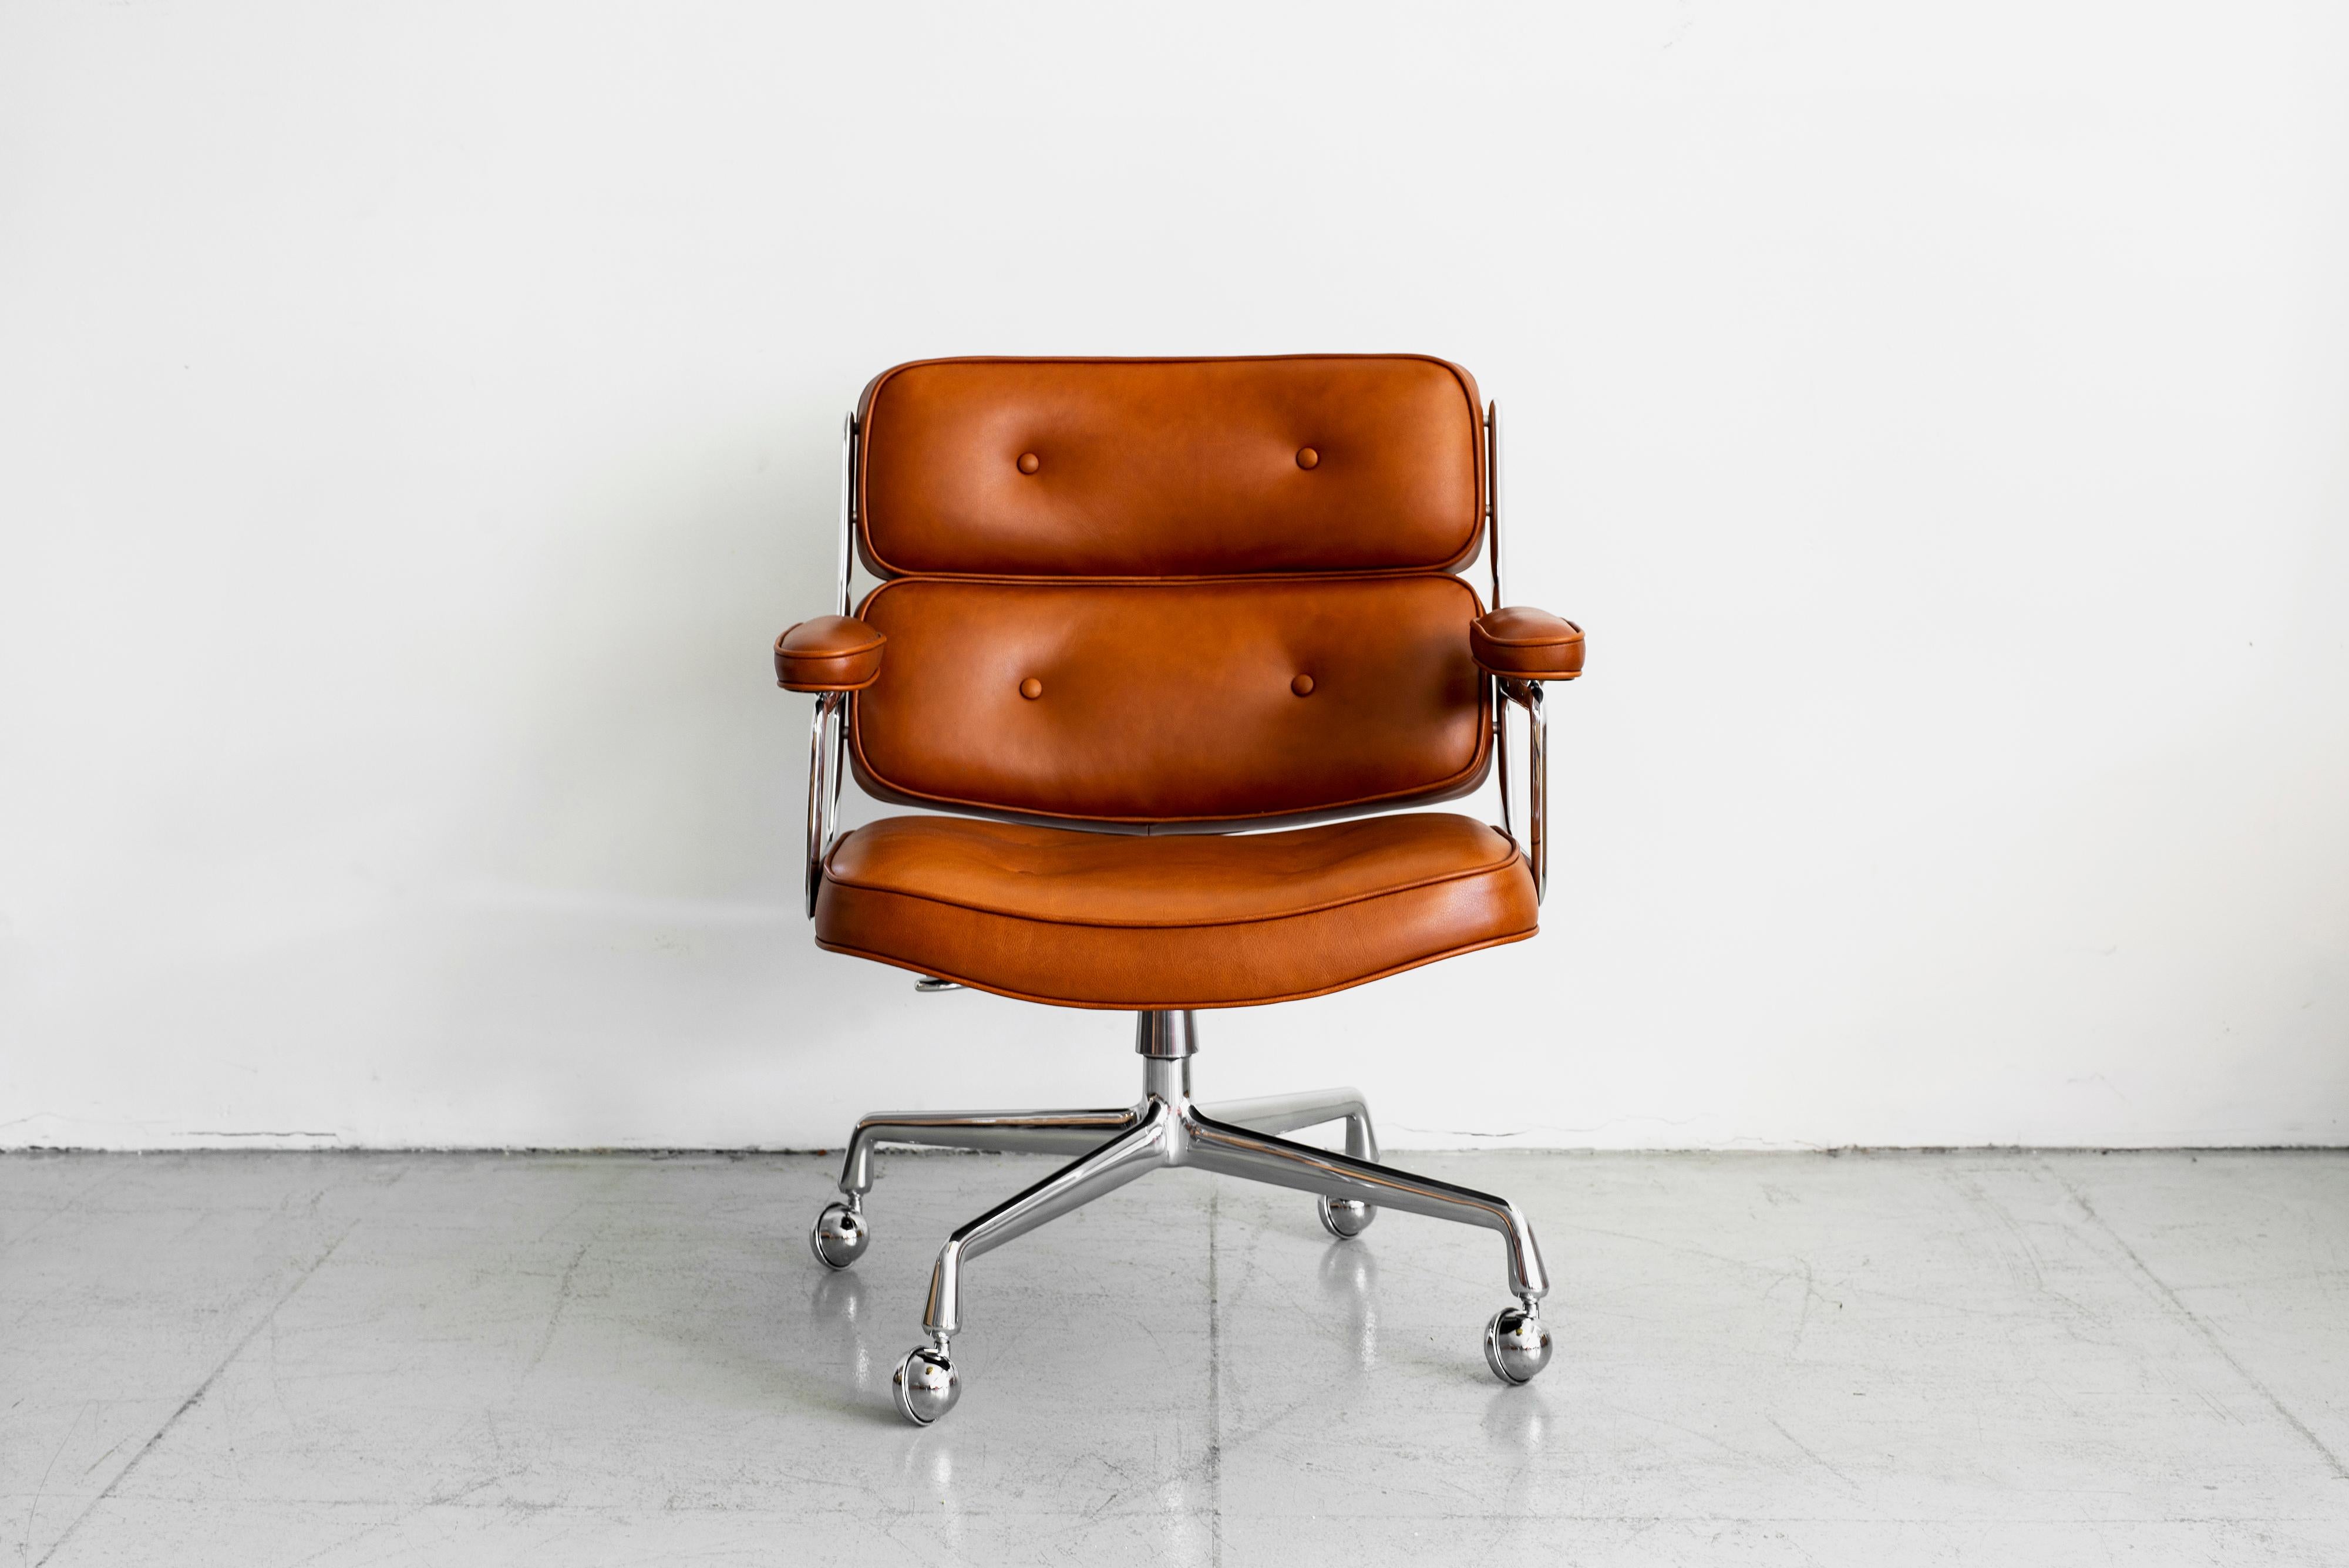 Classic office chair from the Time Life building in New York. New caramel brown leather upholstery with newly polished aluminum base. Chair has an adjustable height with tilt and swivel. Truly an iconic piece.